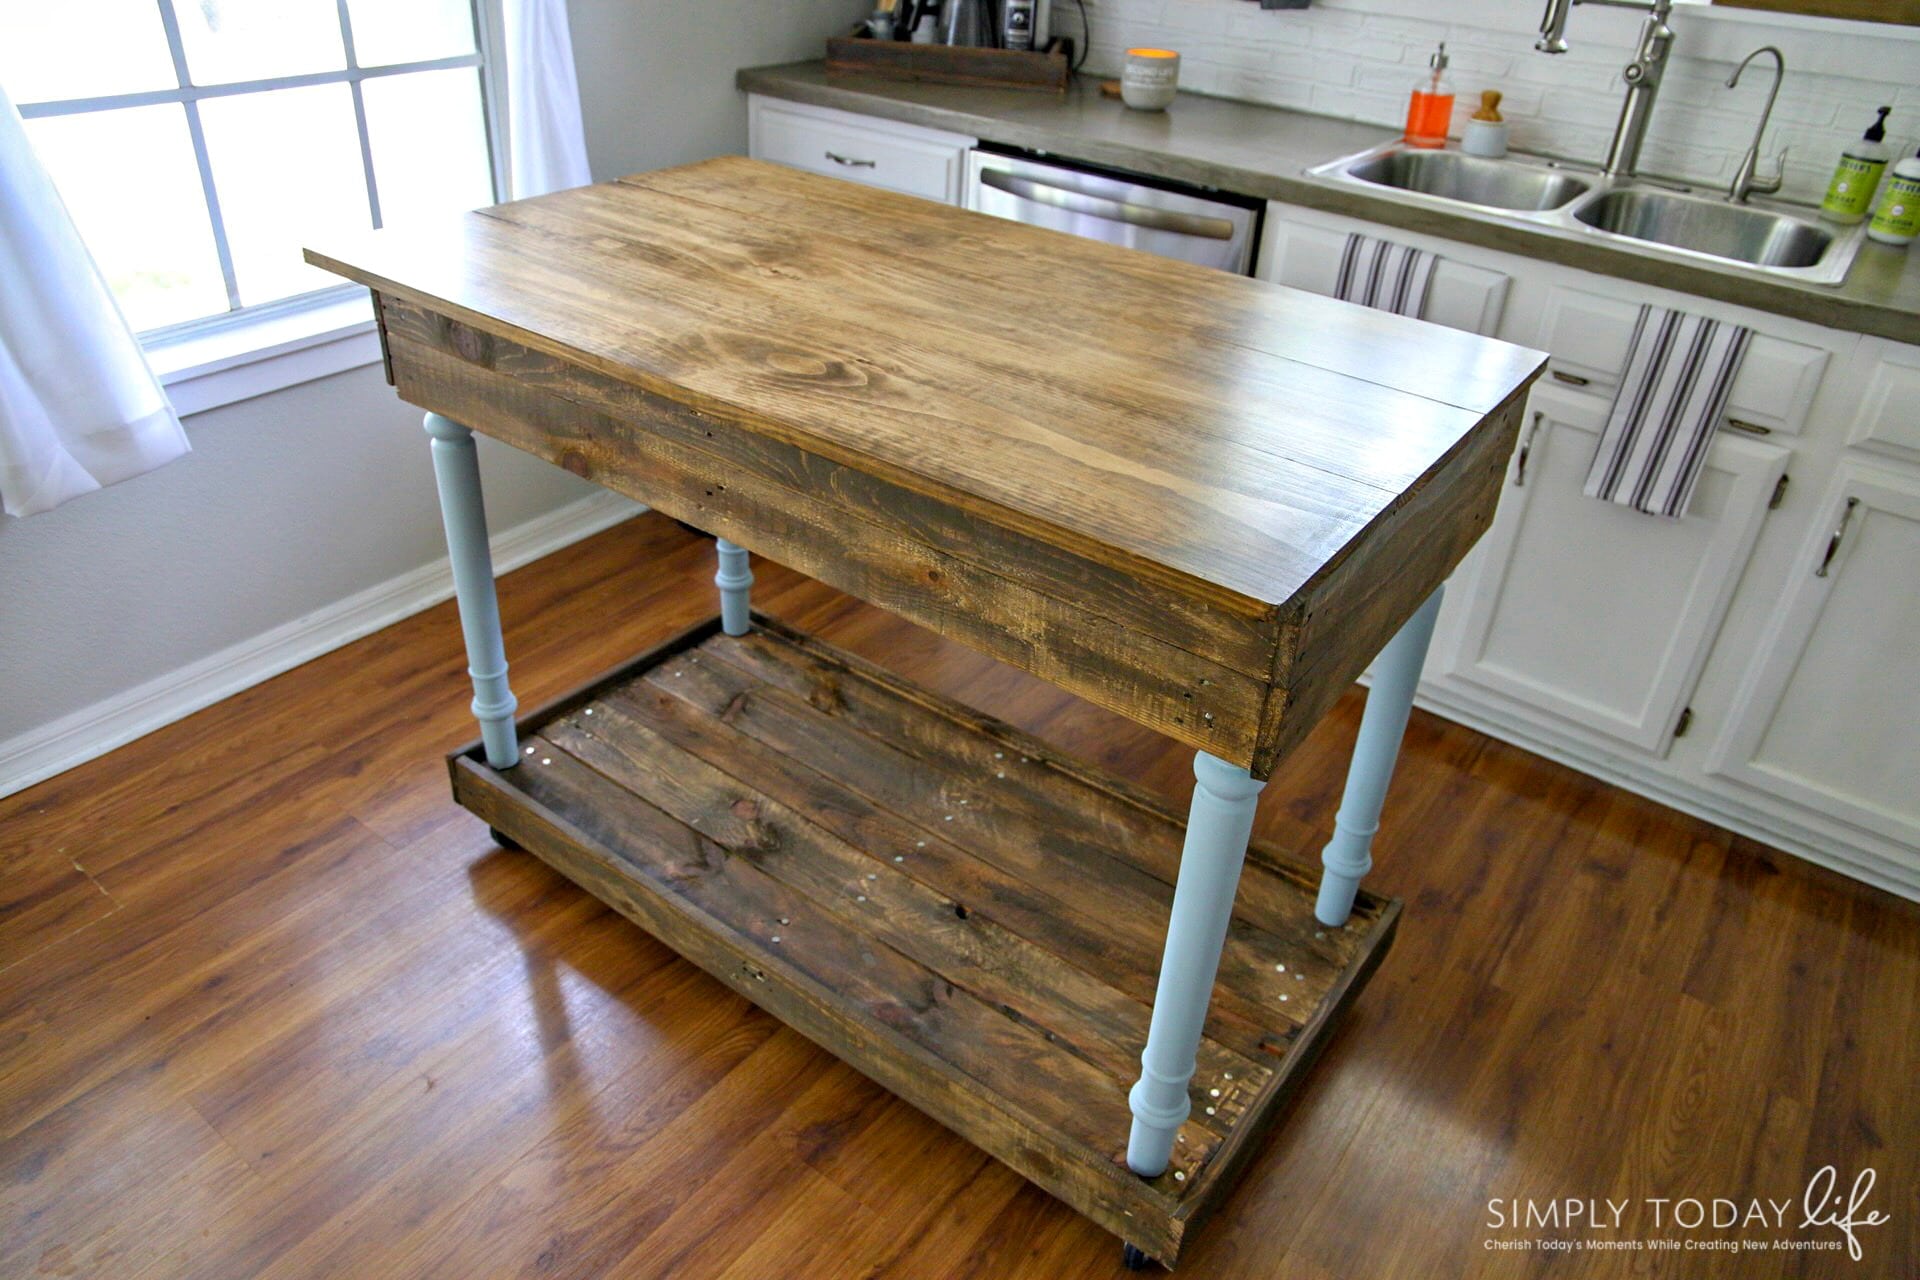 DIY Kitchen Island From Desk and Pallet Wood | Farmhouse Style - simplytodaylife.com